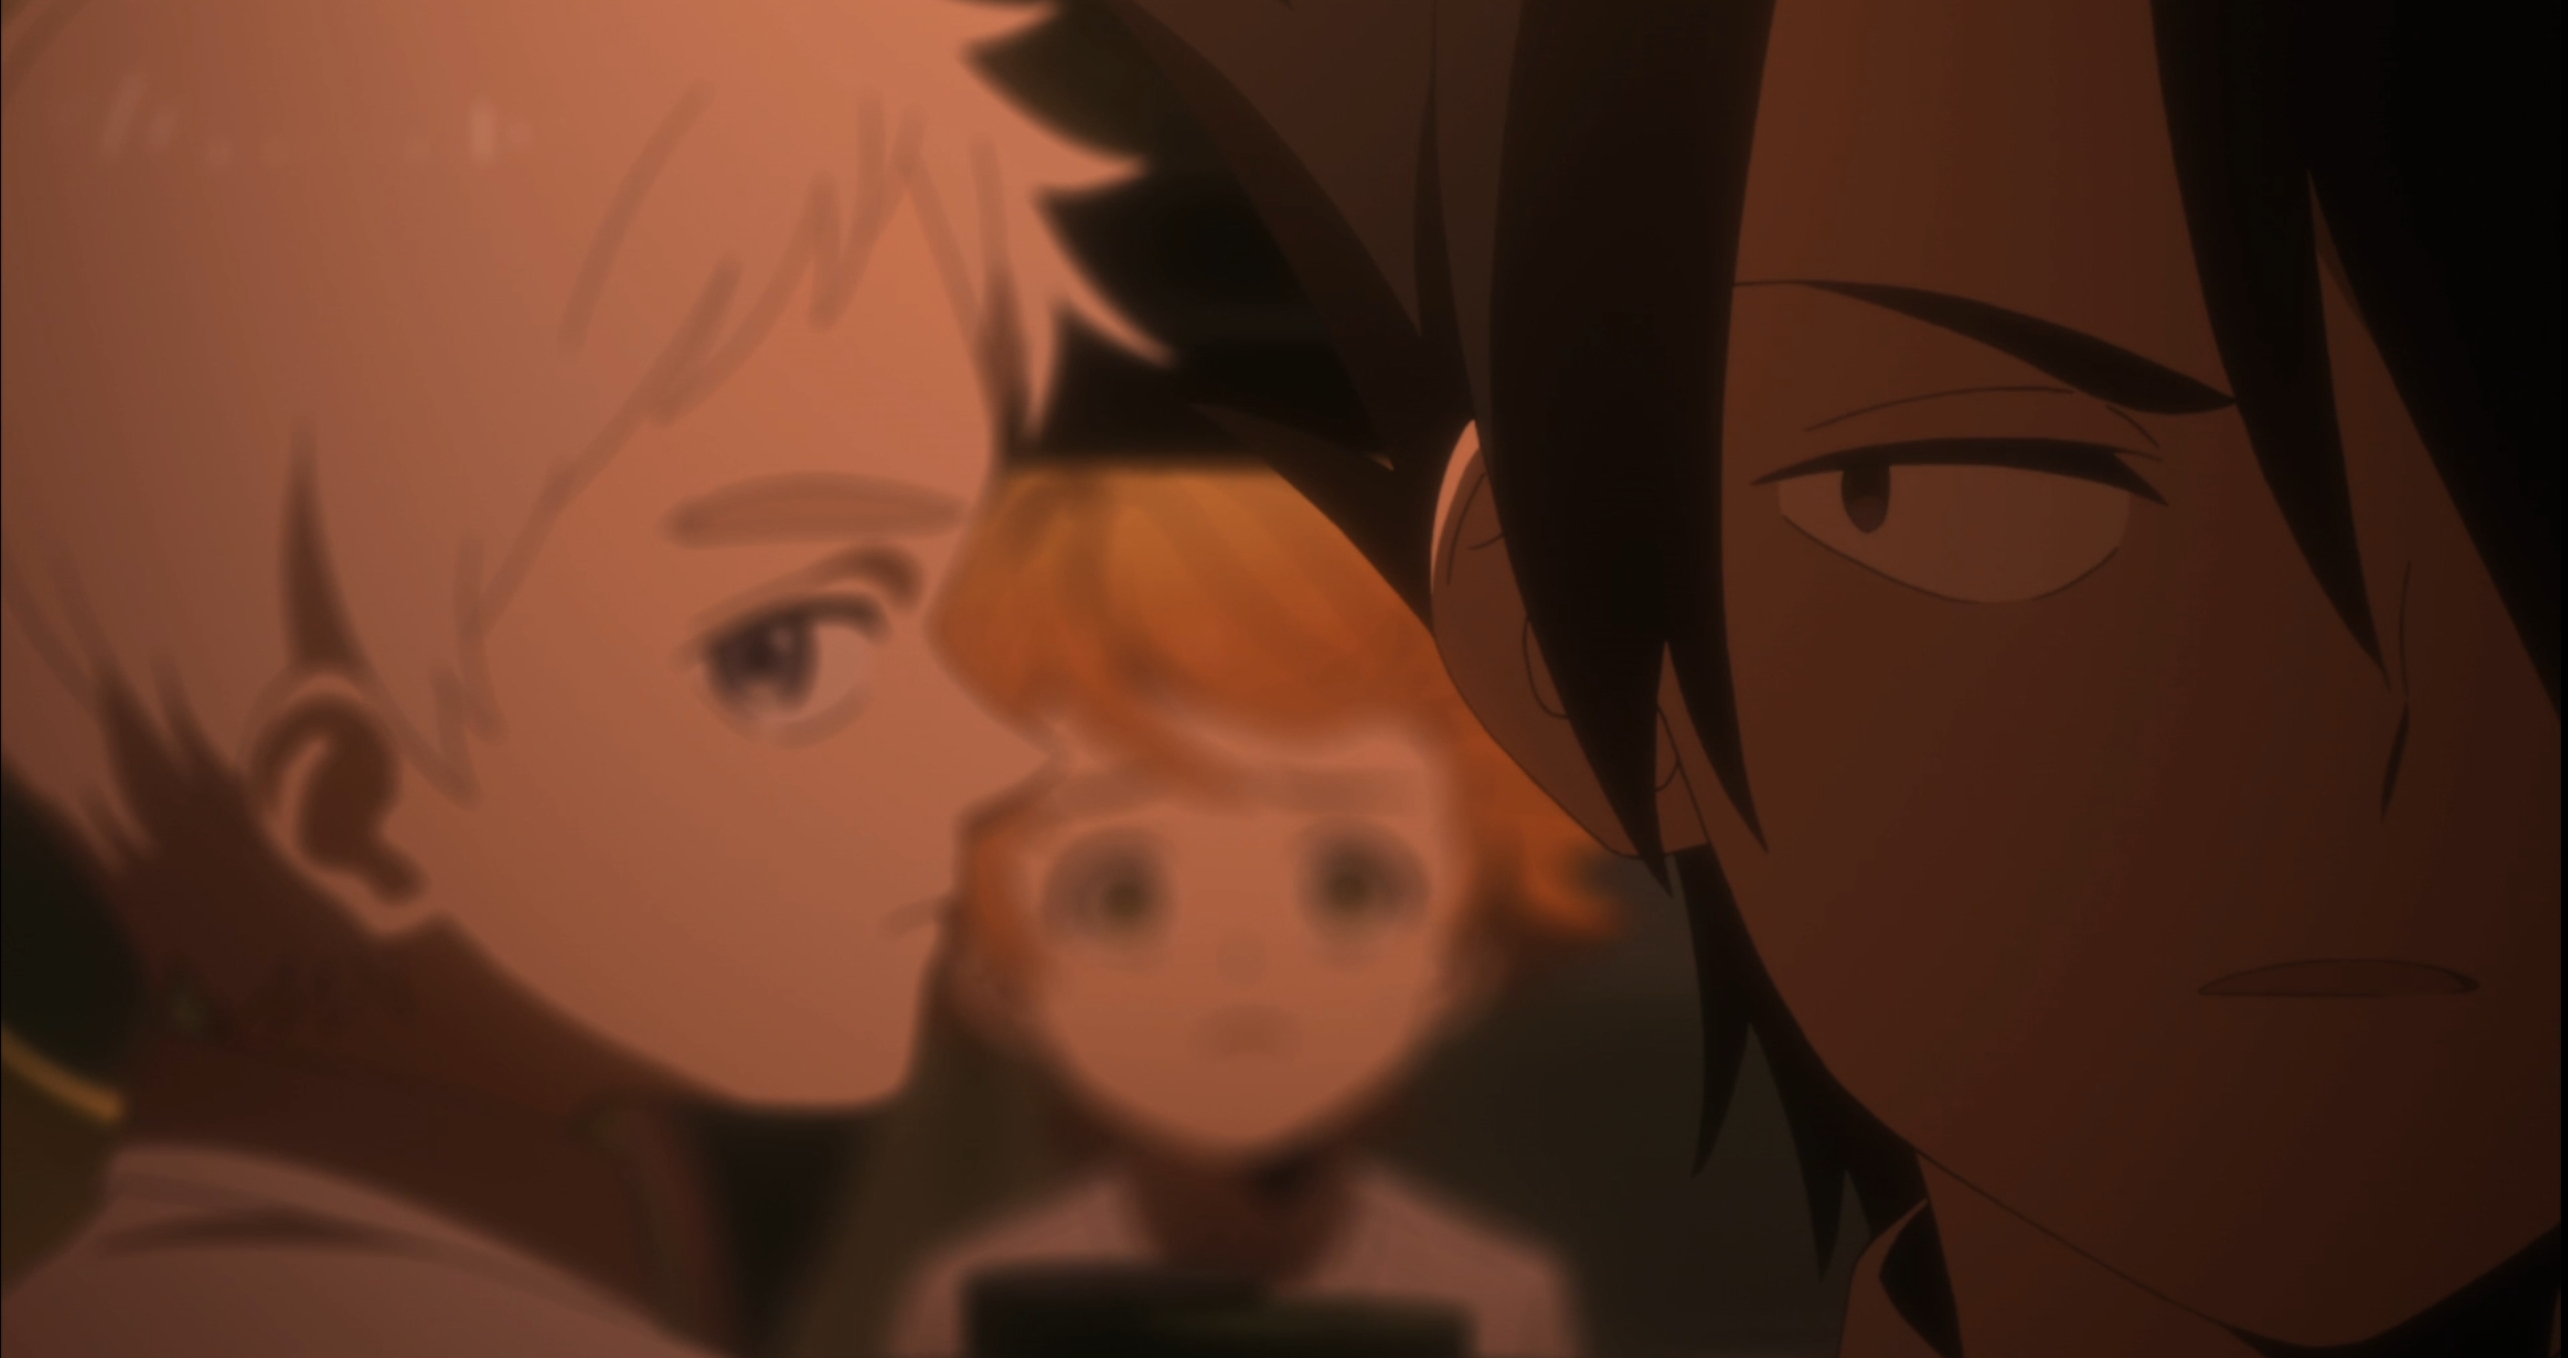 The Promised Neverland Episode 1